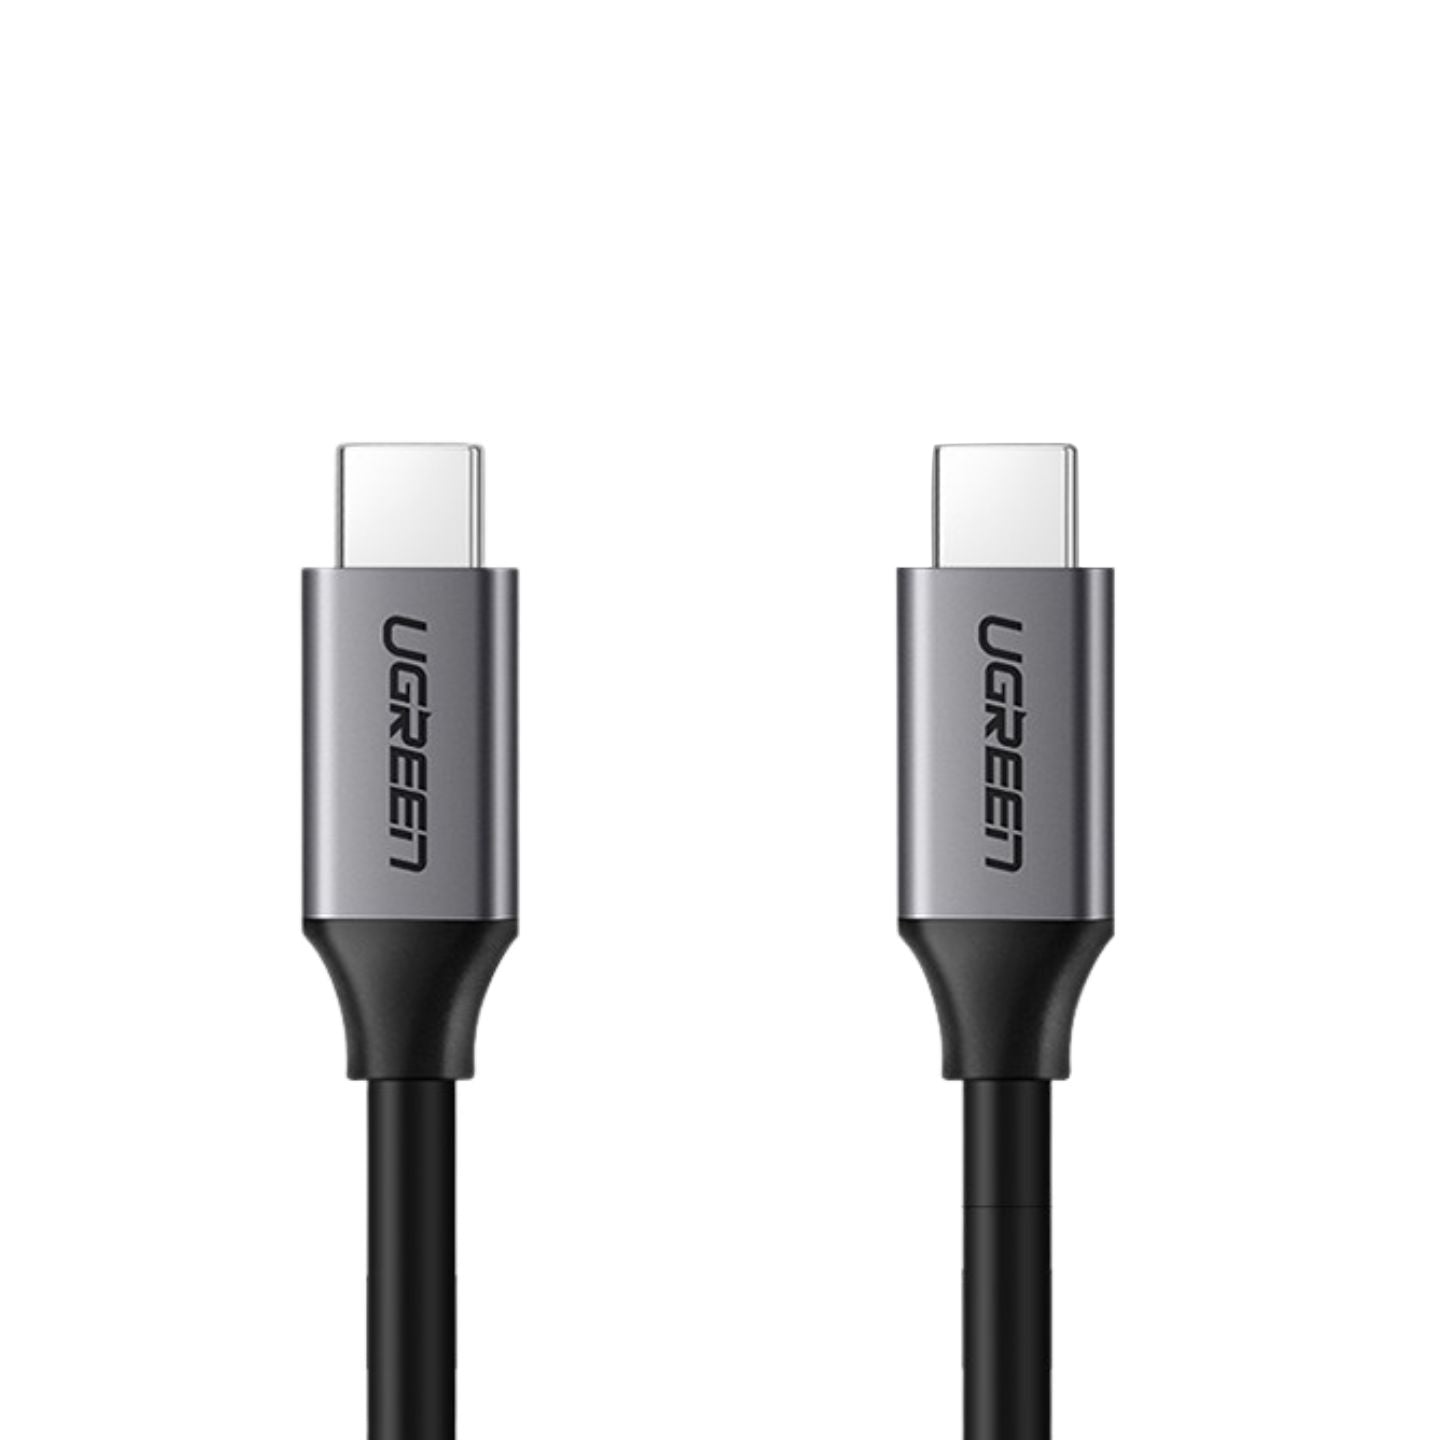 UGREEN USB 3.1 USB-C Male to Male Data Cable 60W Power Delivery PD Gen 1 for Monitor, Laptop, Smartphone (1.5M) | 50751